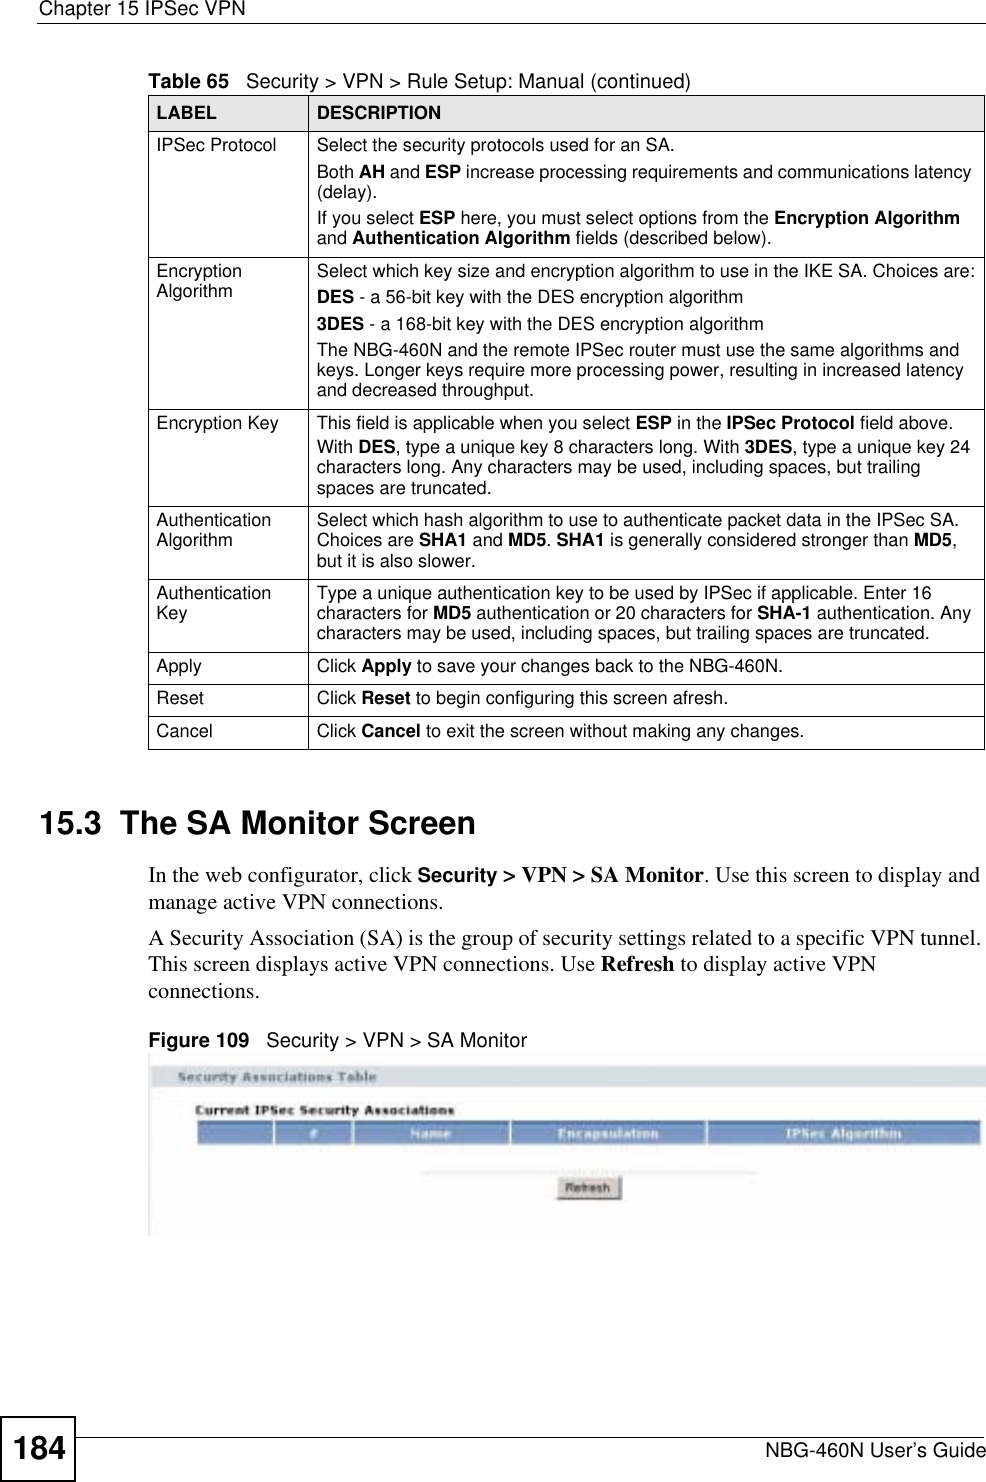 Chapter 15 IPSec VPNNBG-460N User’s Guide18415.3  The SA Monitor ScreenIn the web configurator, click Security &gt; VPN &gt; SA Monitor. Use this screen to display and manage active VPN connections.A Security Association (SA) is the group of security settings related to a specific VPN tunnel. This screen displays active VPN connections. Use Refresh to display active VPN connections.Figure 109   Security &gt; VPN &gt; SA MonitorIPSec Protocol Select the security protocols used for an SA. Both AH and ESP increase processing requirements and communications latency (delay). If you select ESP here, you must select options from the Encryption Algorithmand Authentication Algorithm fields (described below).Encryption Algorithm Select which key size and encryption algorithm to use in the IKE SA. Choices are:DES - a 56-bit key with the DES encryption algorithm3DES - a 168-bit key with the DES encryption algorithmThe NBG-460N and the remote IPSec router must use the same algorithms and keys. Longer keys require more processing power, resulting in increased latency and decreased throughput.Encryption Key  This field is applicable when you select ESP in the IPSec Protocol field above. With DES, type a unique key 8 characters long. With 3DES, type a unique key 24 characters long. Any characters may be used, including spaces, but trailing spaces are truncated.Authentication Algorithm Select which hash algorithm to use to authenticate packet data in the IPSec SA. Choices are SHA1 and MD5.SHA1 is generally considered stronger than MD5,but it is also slower.Authentication Key Type a unique authentication key to be used by IPSec if applicable. Enter 16 characters for MD5 authentication or 20 characters for SHA-1 authentication. Any characters may be used, including spaces, but trailing spaces are truncated.Apply Click Apply to save your changes back to the NBG-460N.Reset Click Reset to begin configuring this screen afresh.Cancel Click Cancel to exit the screen without making any changes.Table 65   Security &gt; VPN &gt; Rule Setup: Manual (continued)LABEL DESCRIPTION